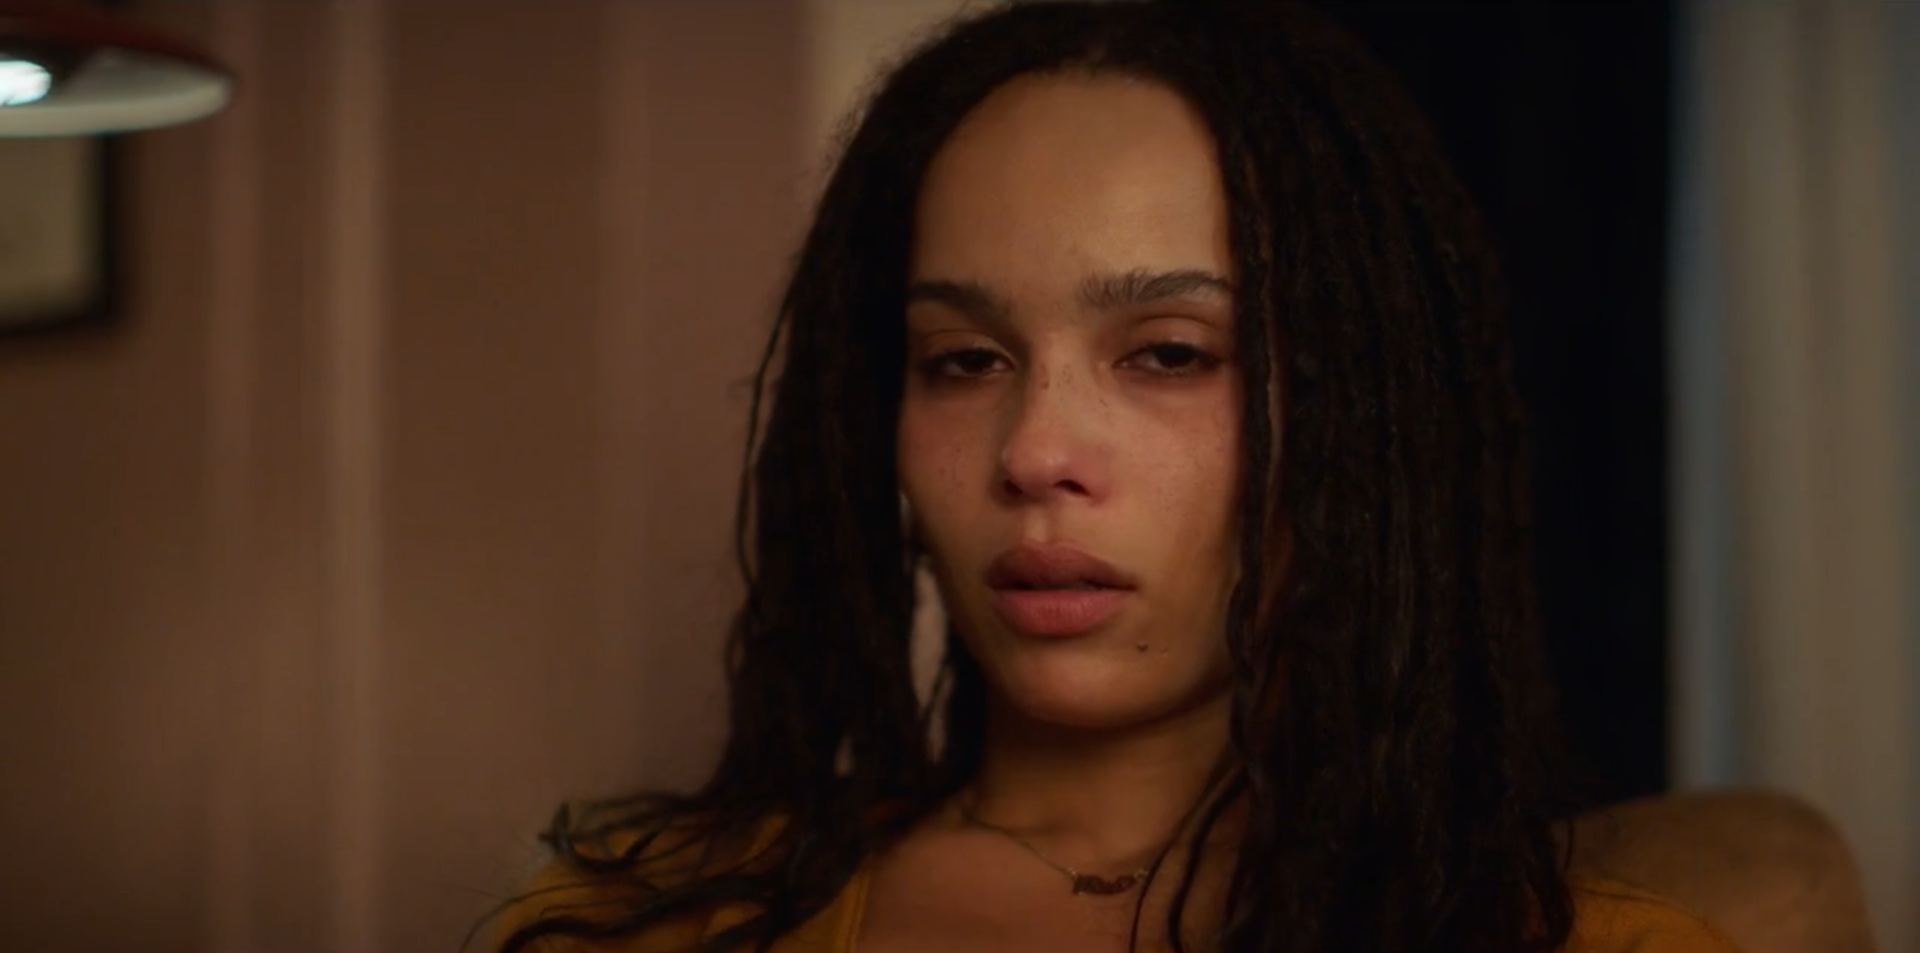 Zoë Kravitz. makes a great binge-watching subject for the isolated society ...